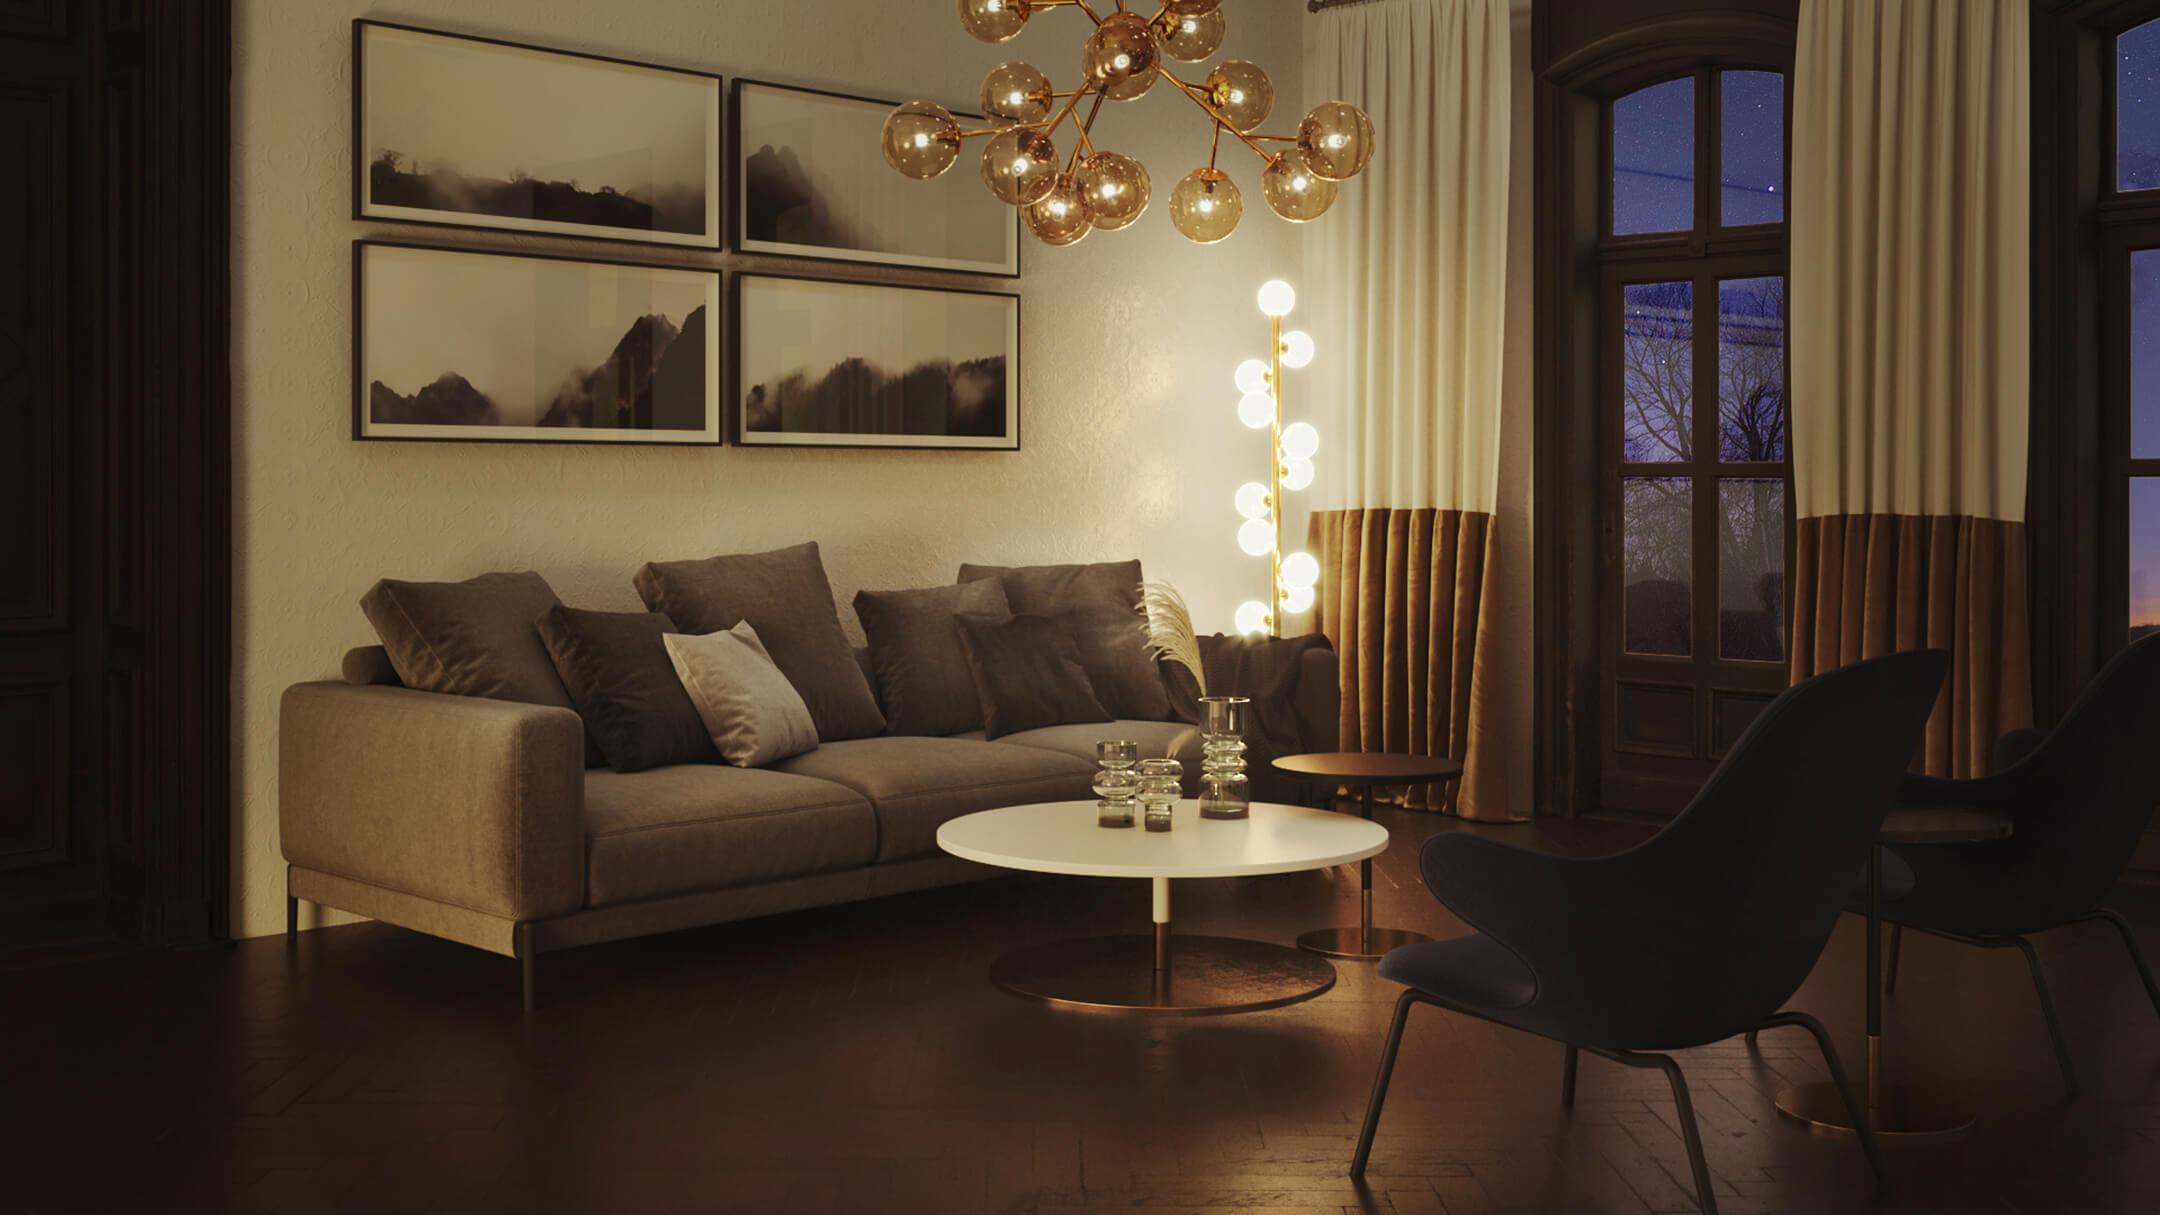 3D Visualization of a Room Lit with Artificial Lighting